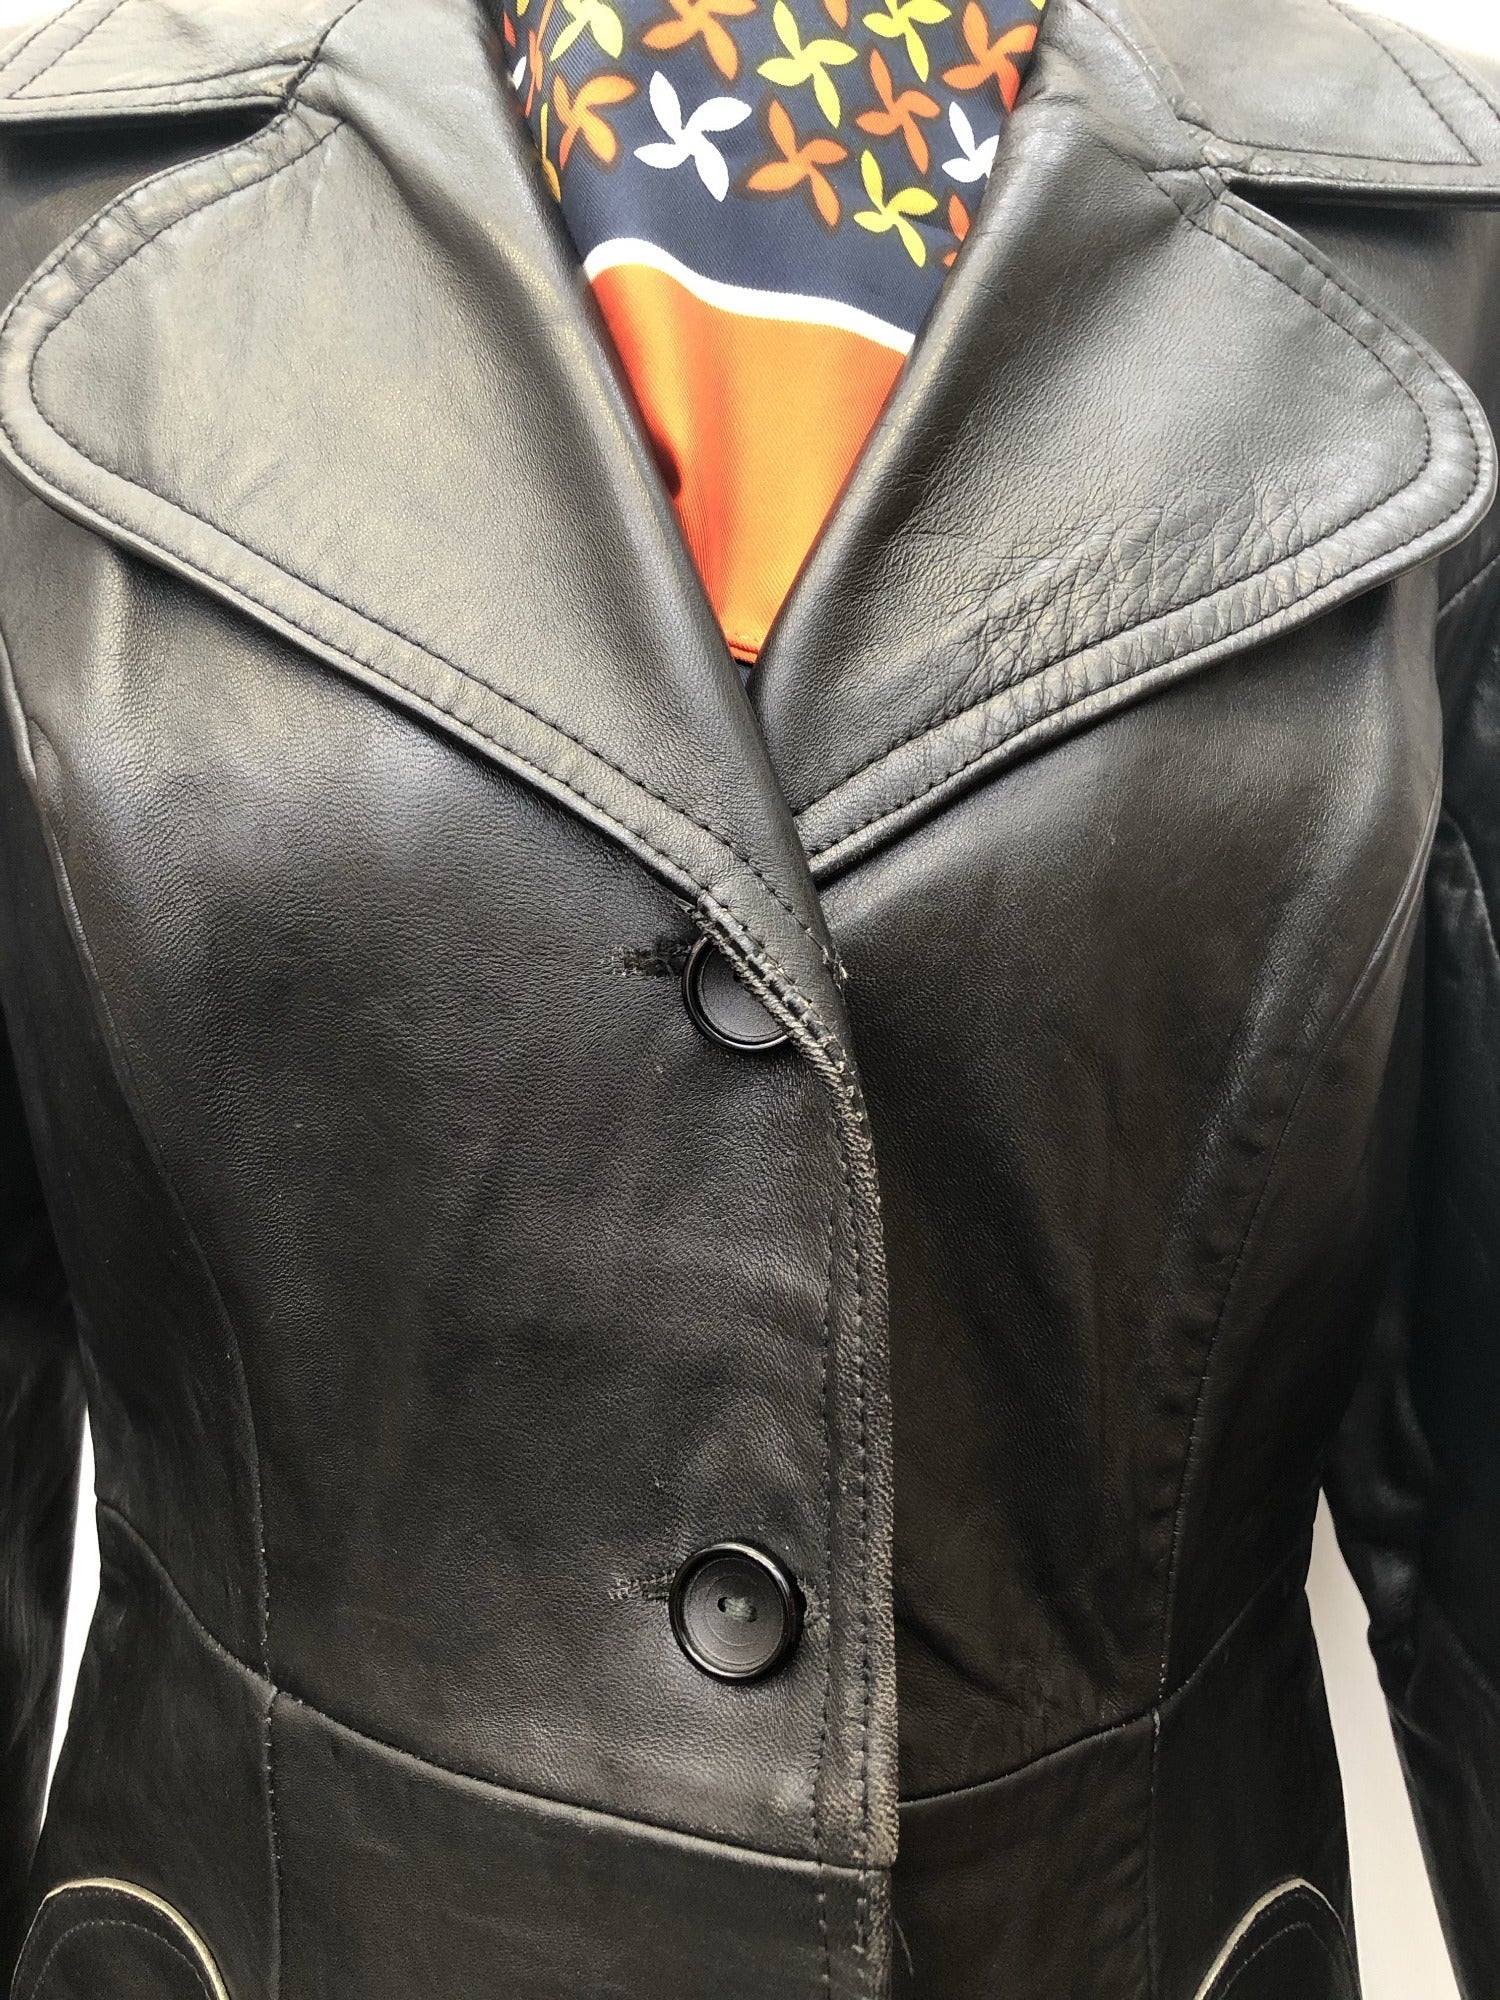 Womens Vintage 1970s Black Leather Jacket Suede Centre Swear & Wells Size 12 long length 70s circular pockets collared design button front - Urban Village Vintage